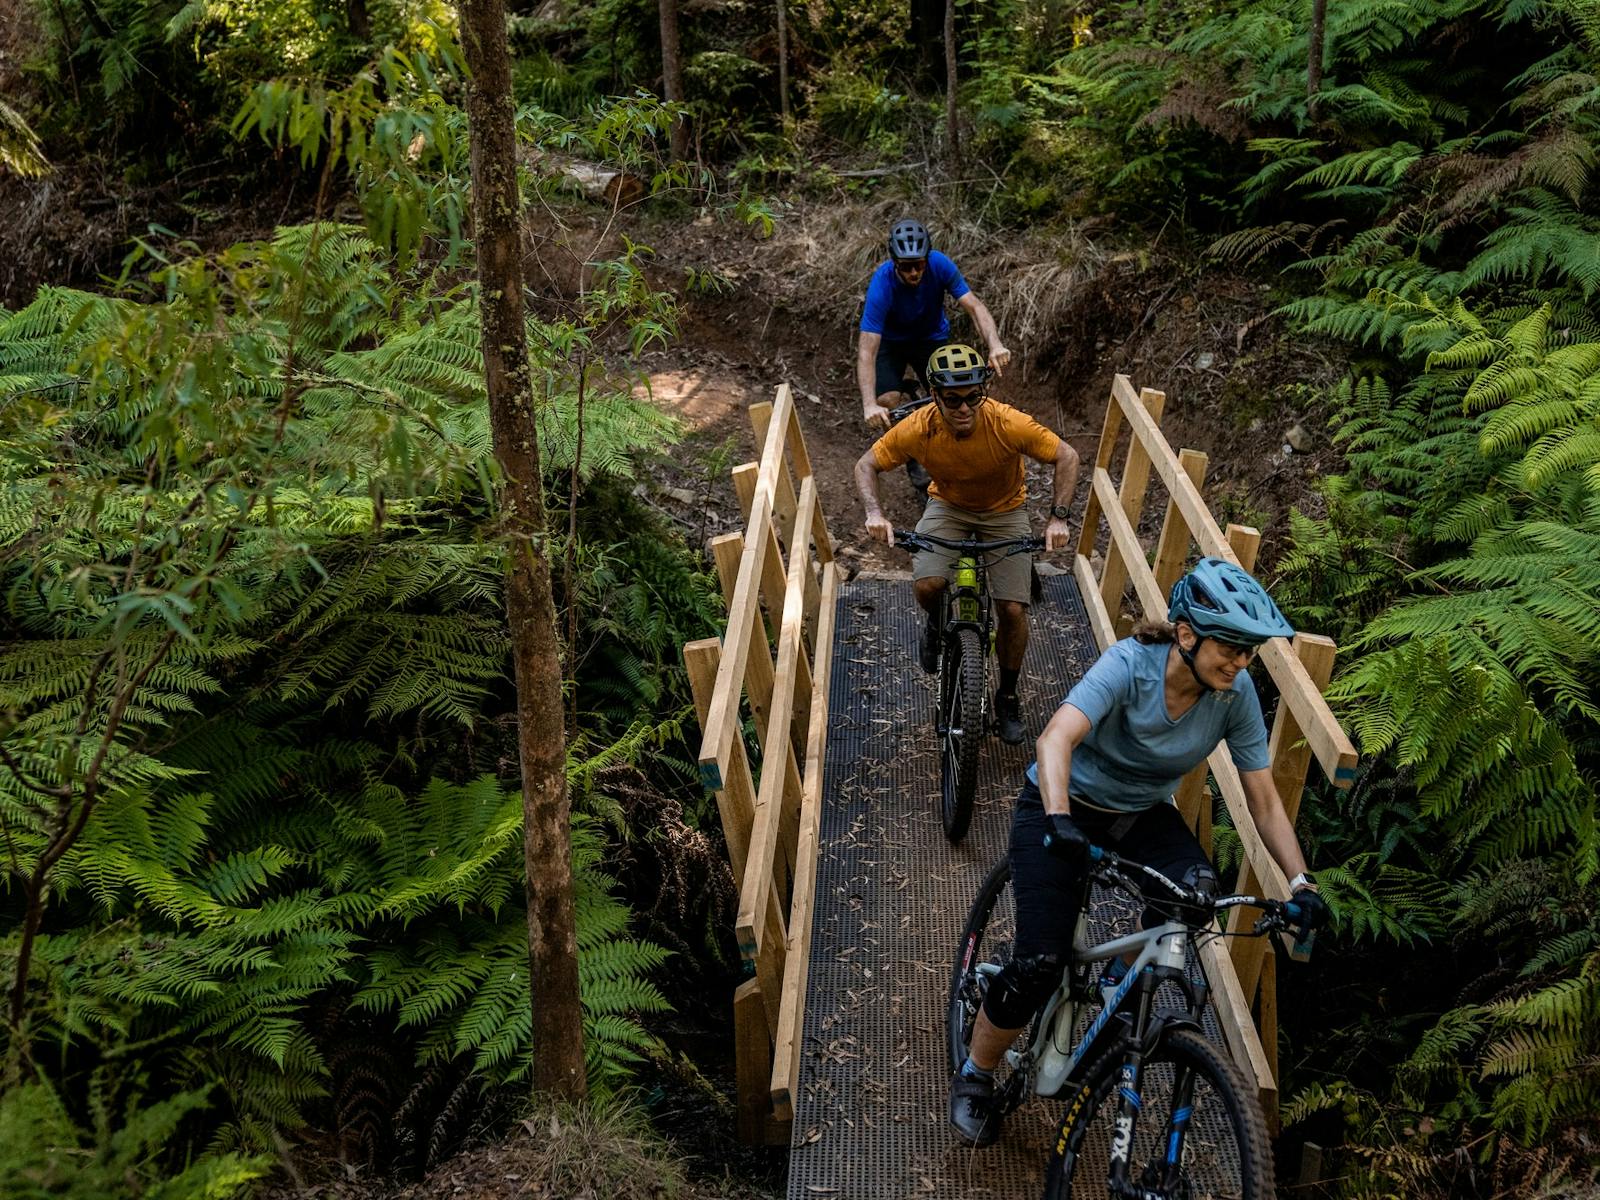 Three riders ride across a bridge on mountain bikes. The bridge is surrounded by ferns.